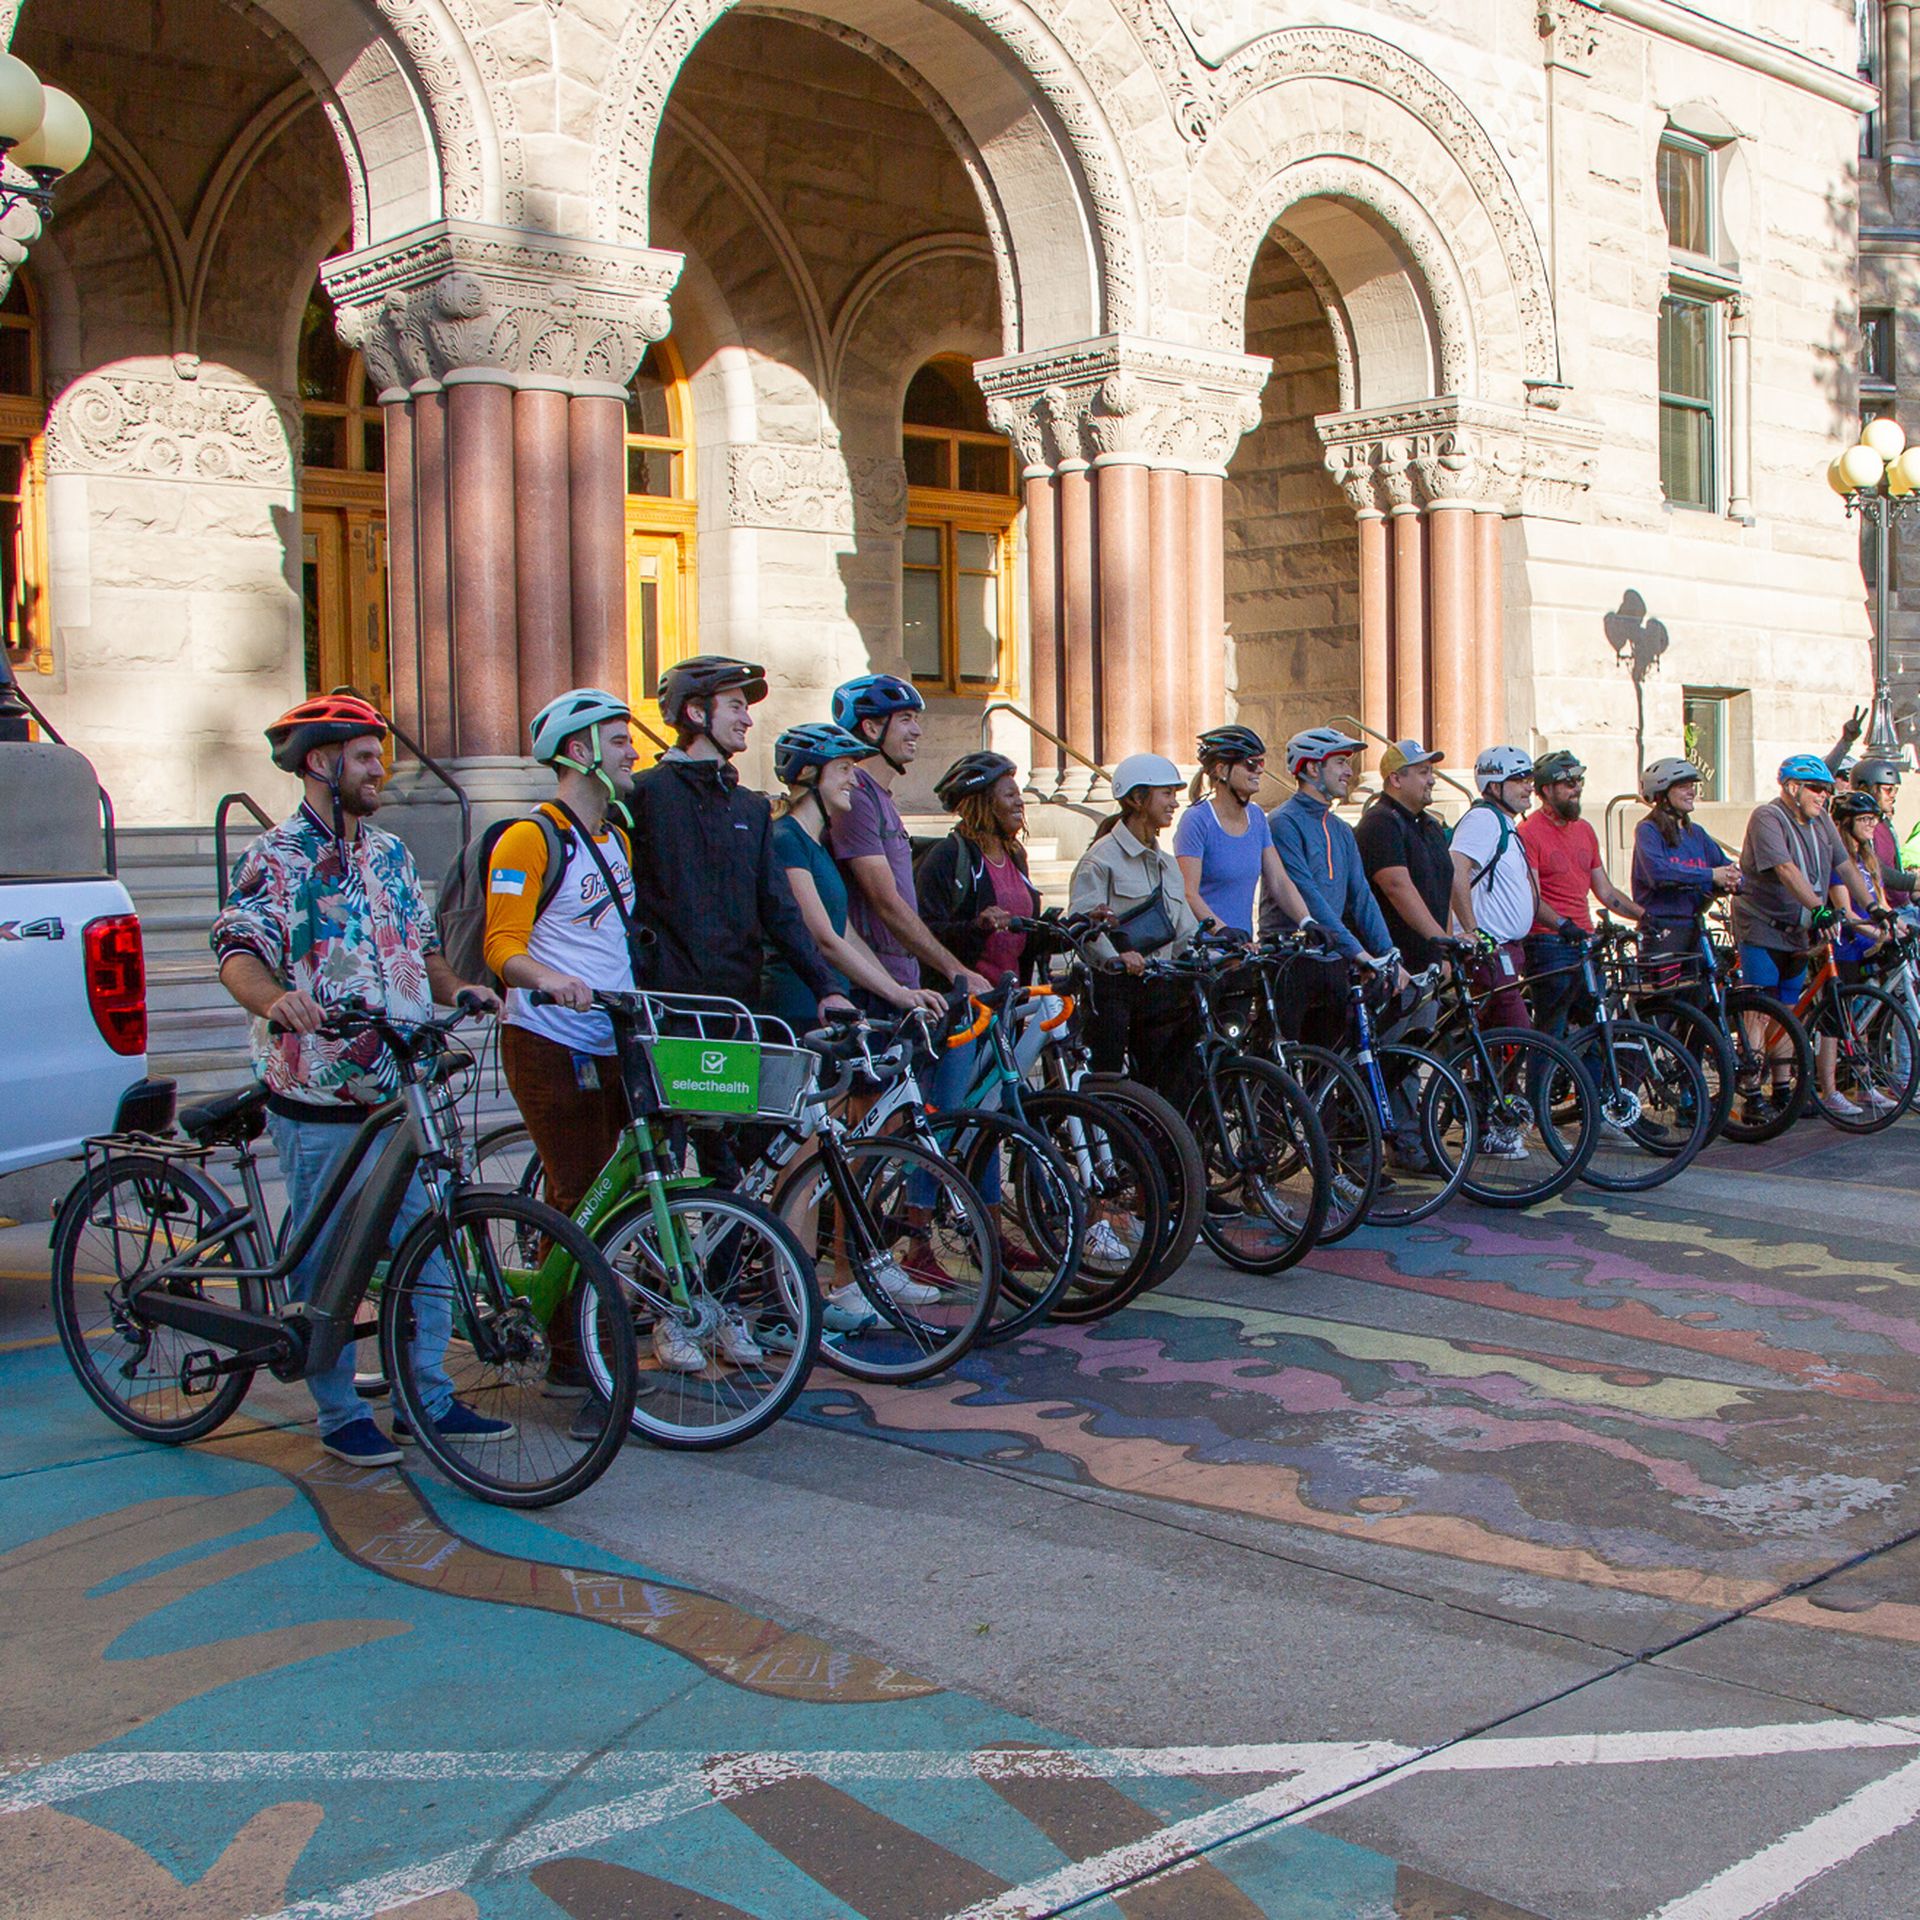 A couple dozen cyclists line up with their bikes in front of a building.